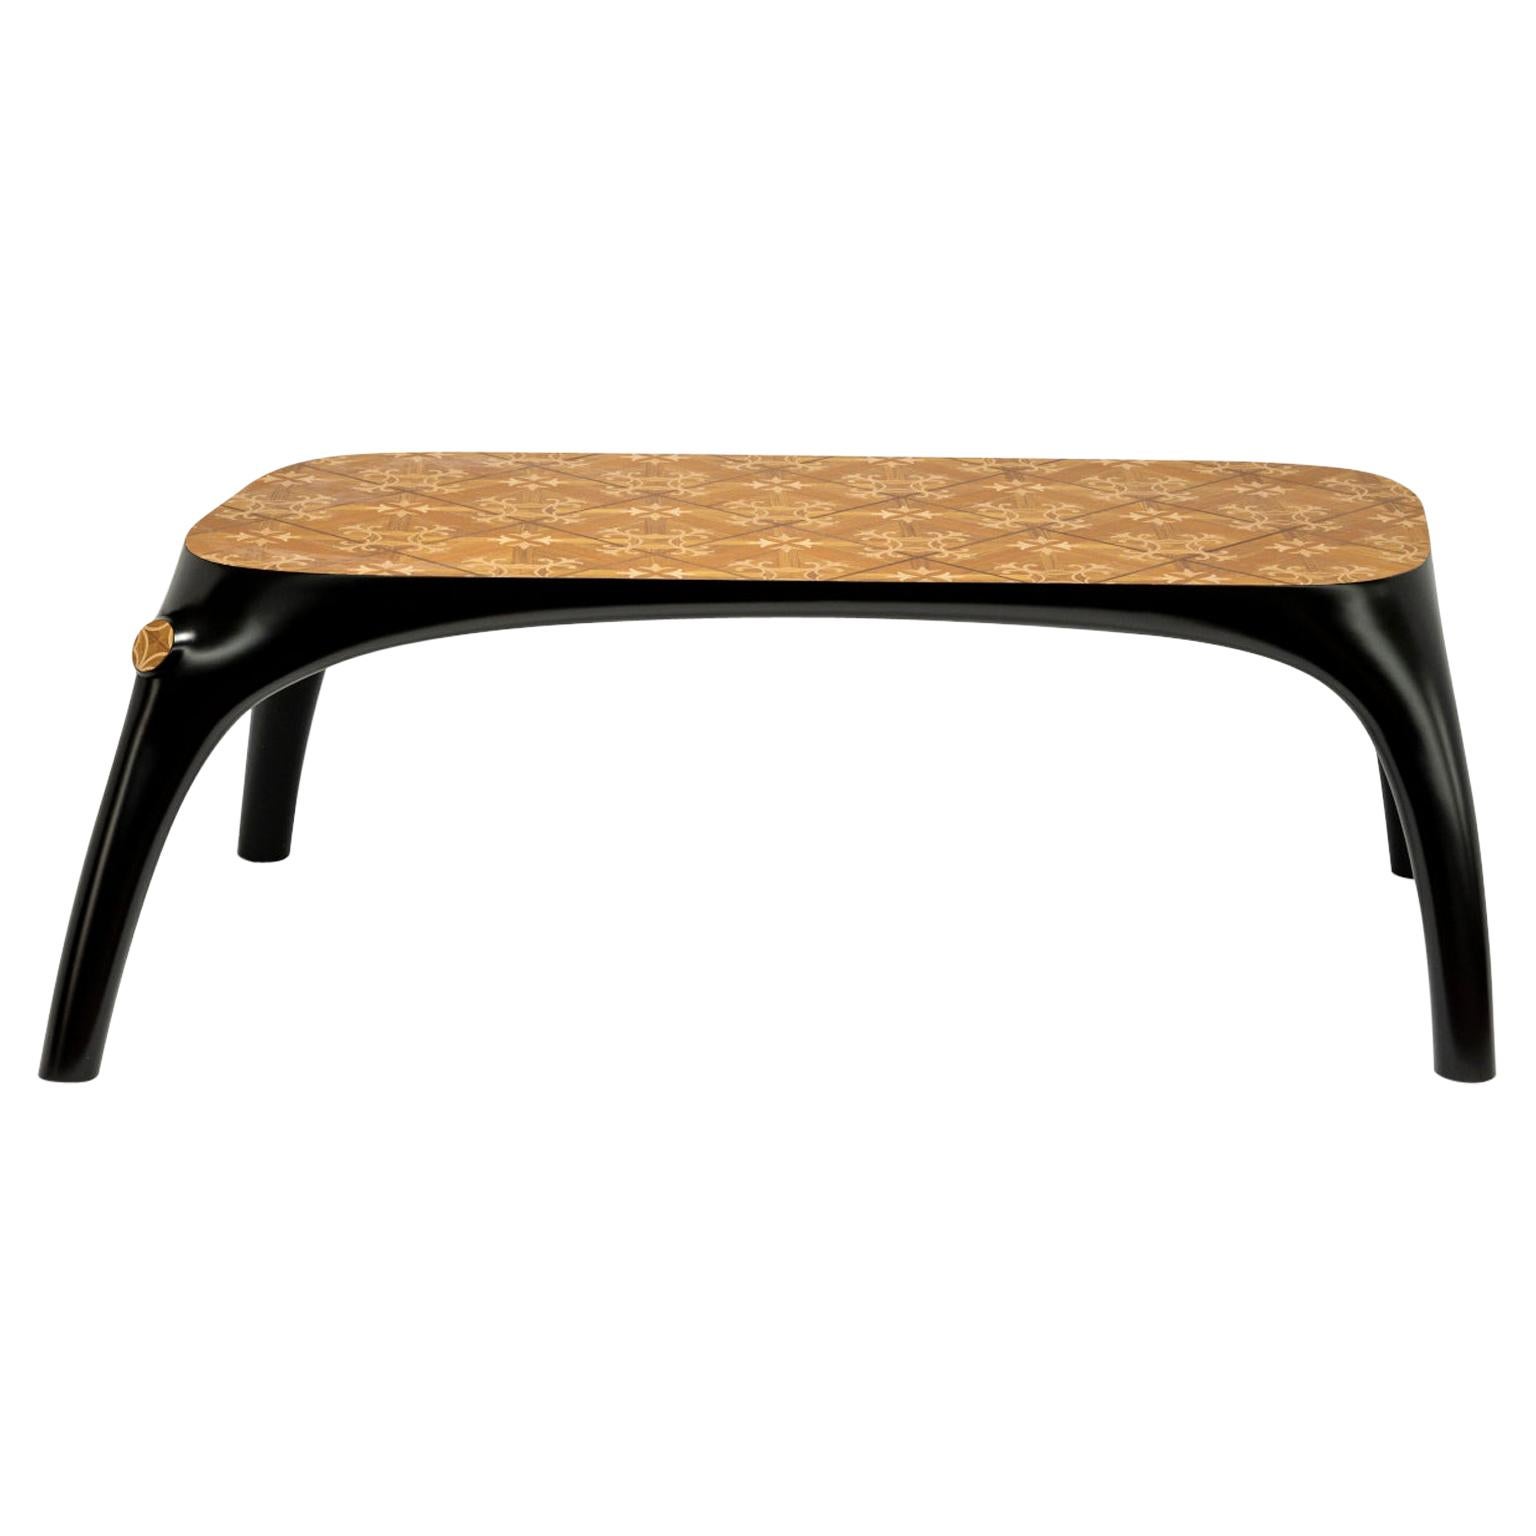 21st Century Marcantonio Dining Table Wood Inlay Black Lacquered Scapin